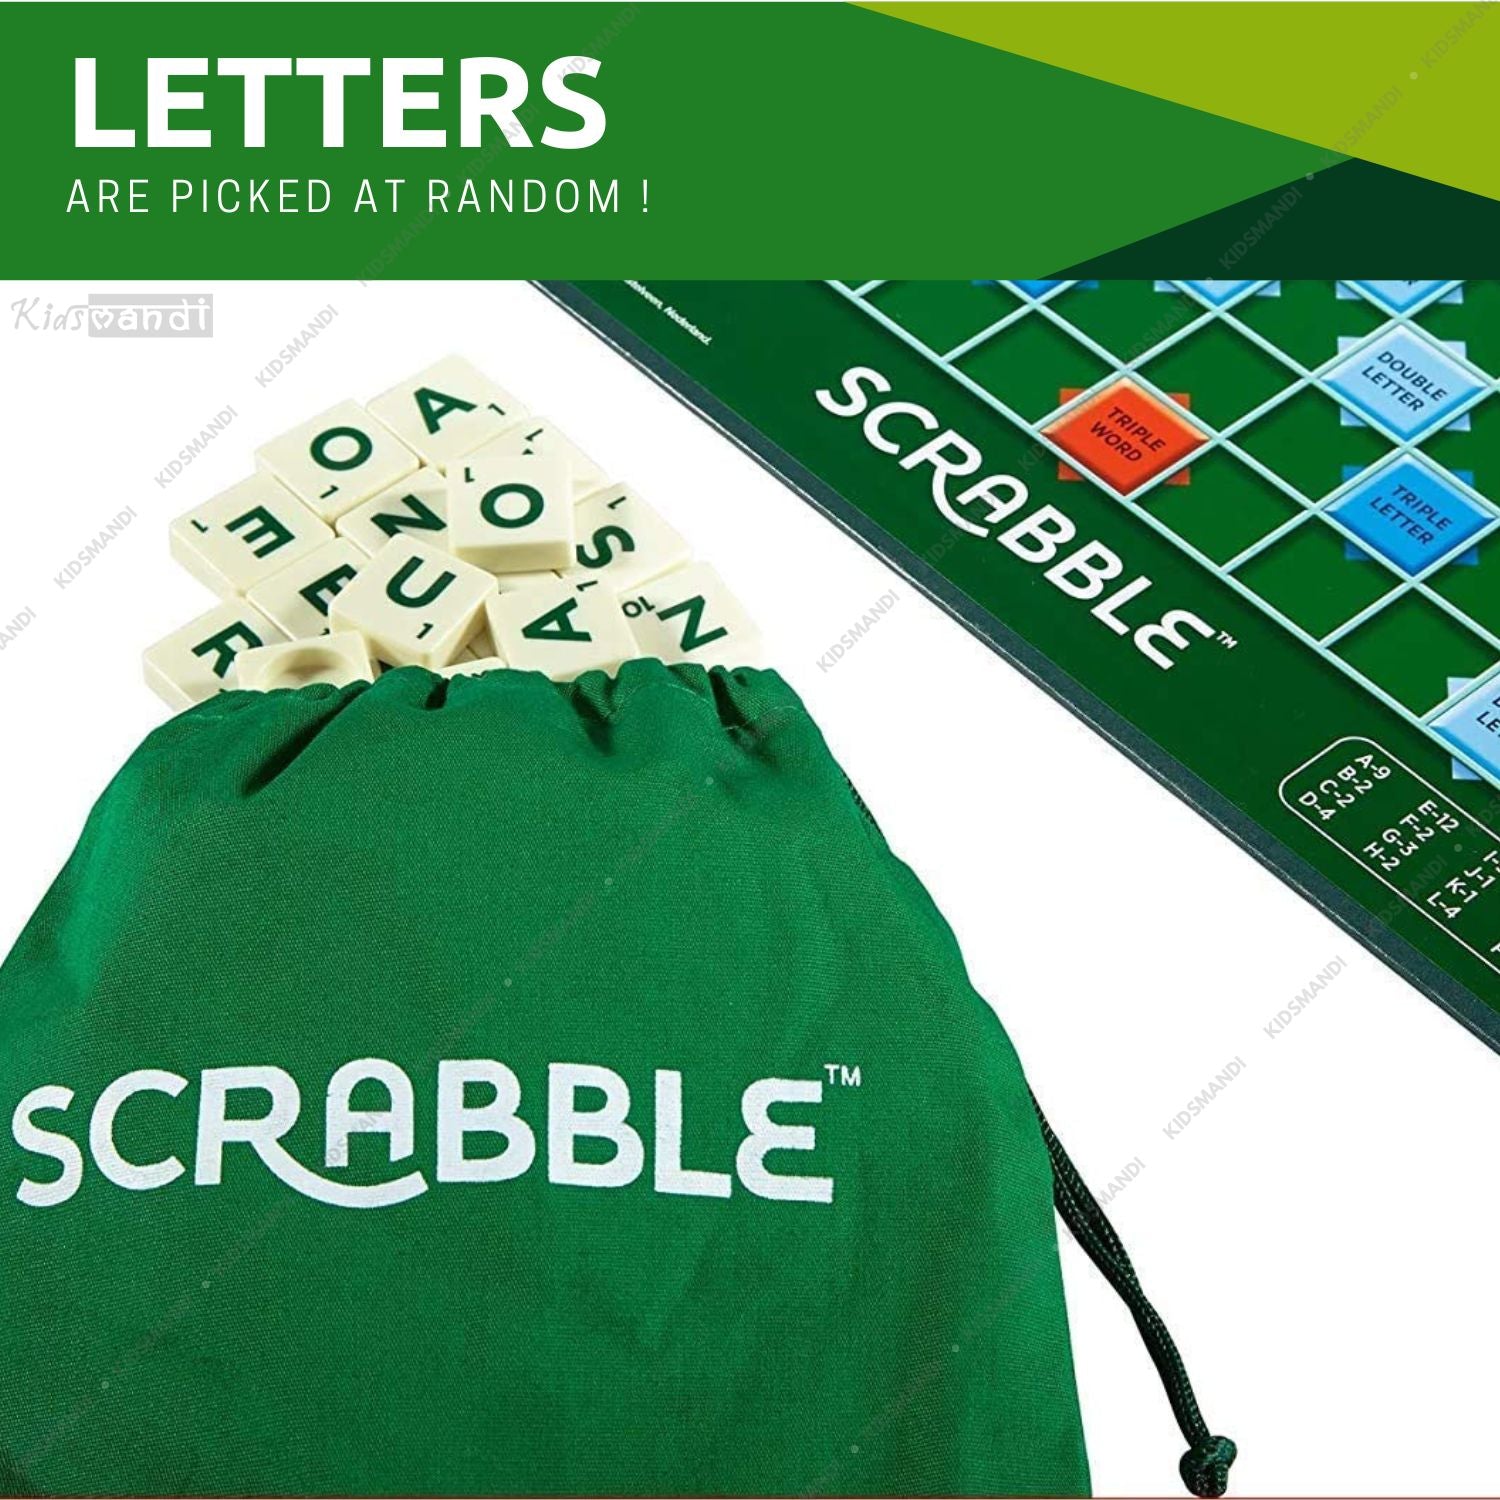 Kids Mandi - Scrabble board game with colorful letter tiles.